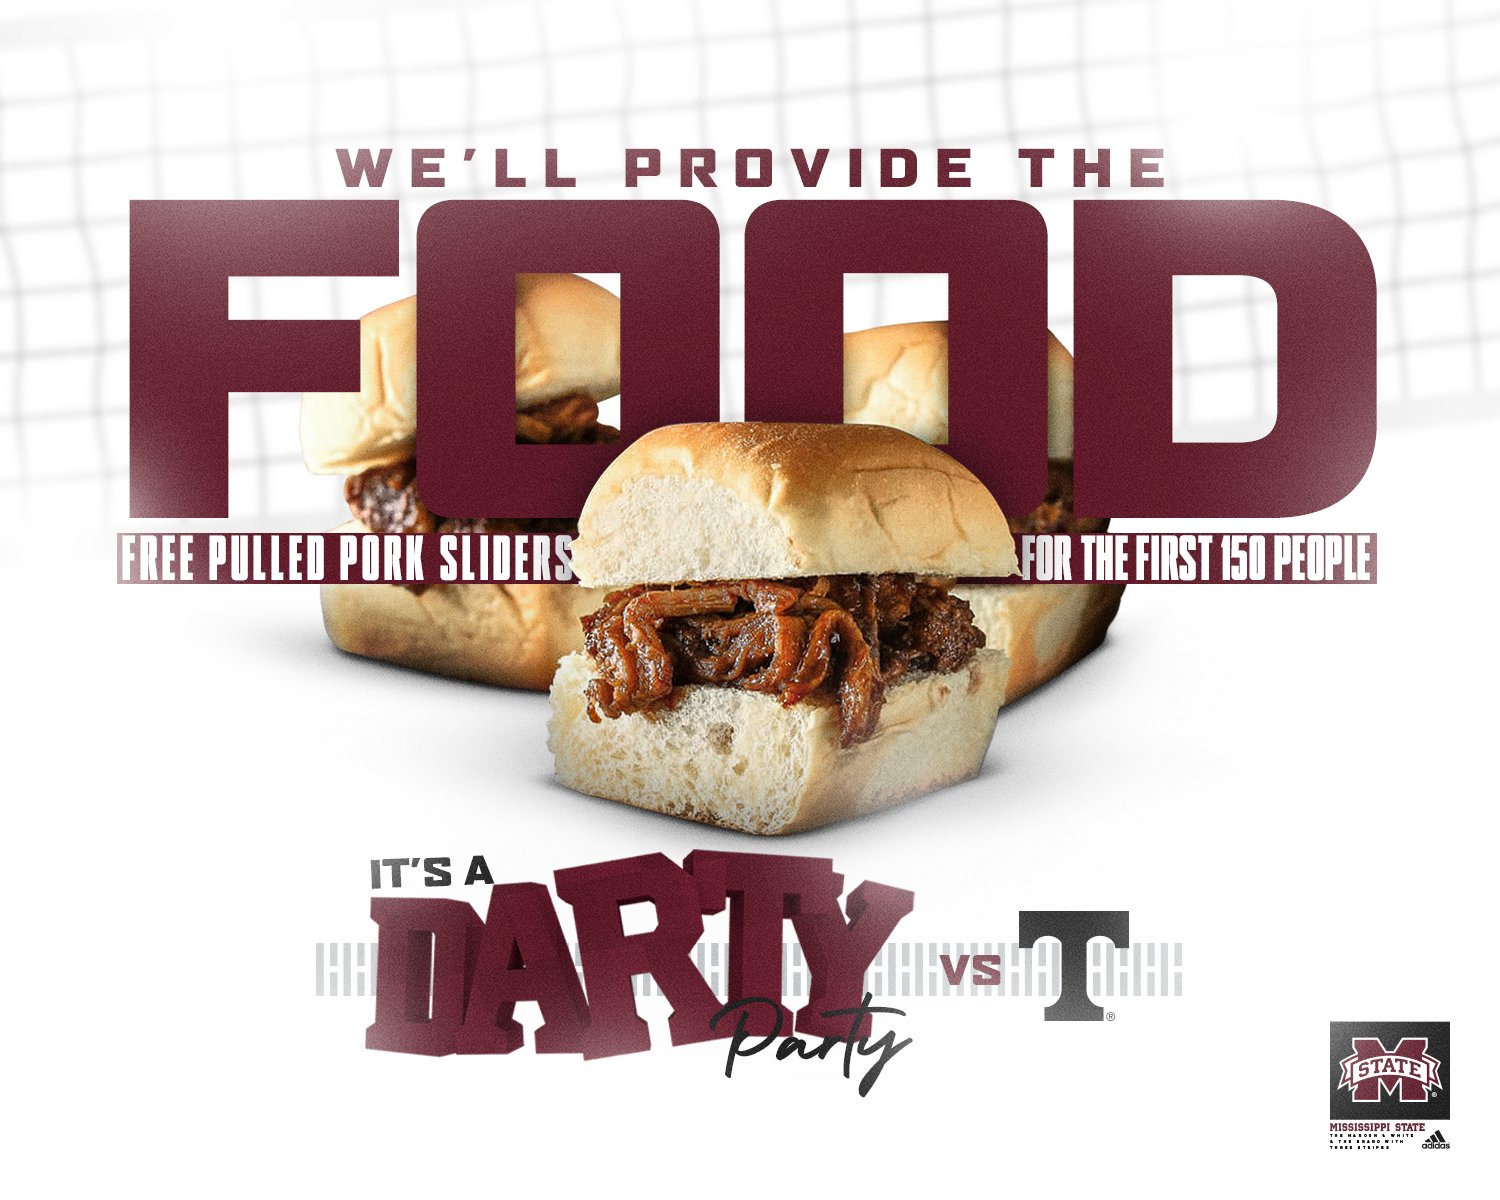 Maroon and white graphic with images of pulled pork sliders that the first 150 fans will receive for free at MSU's Nov. 13 volleyball match